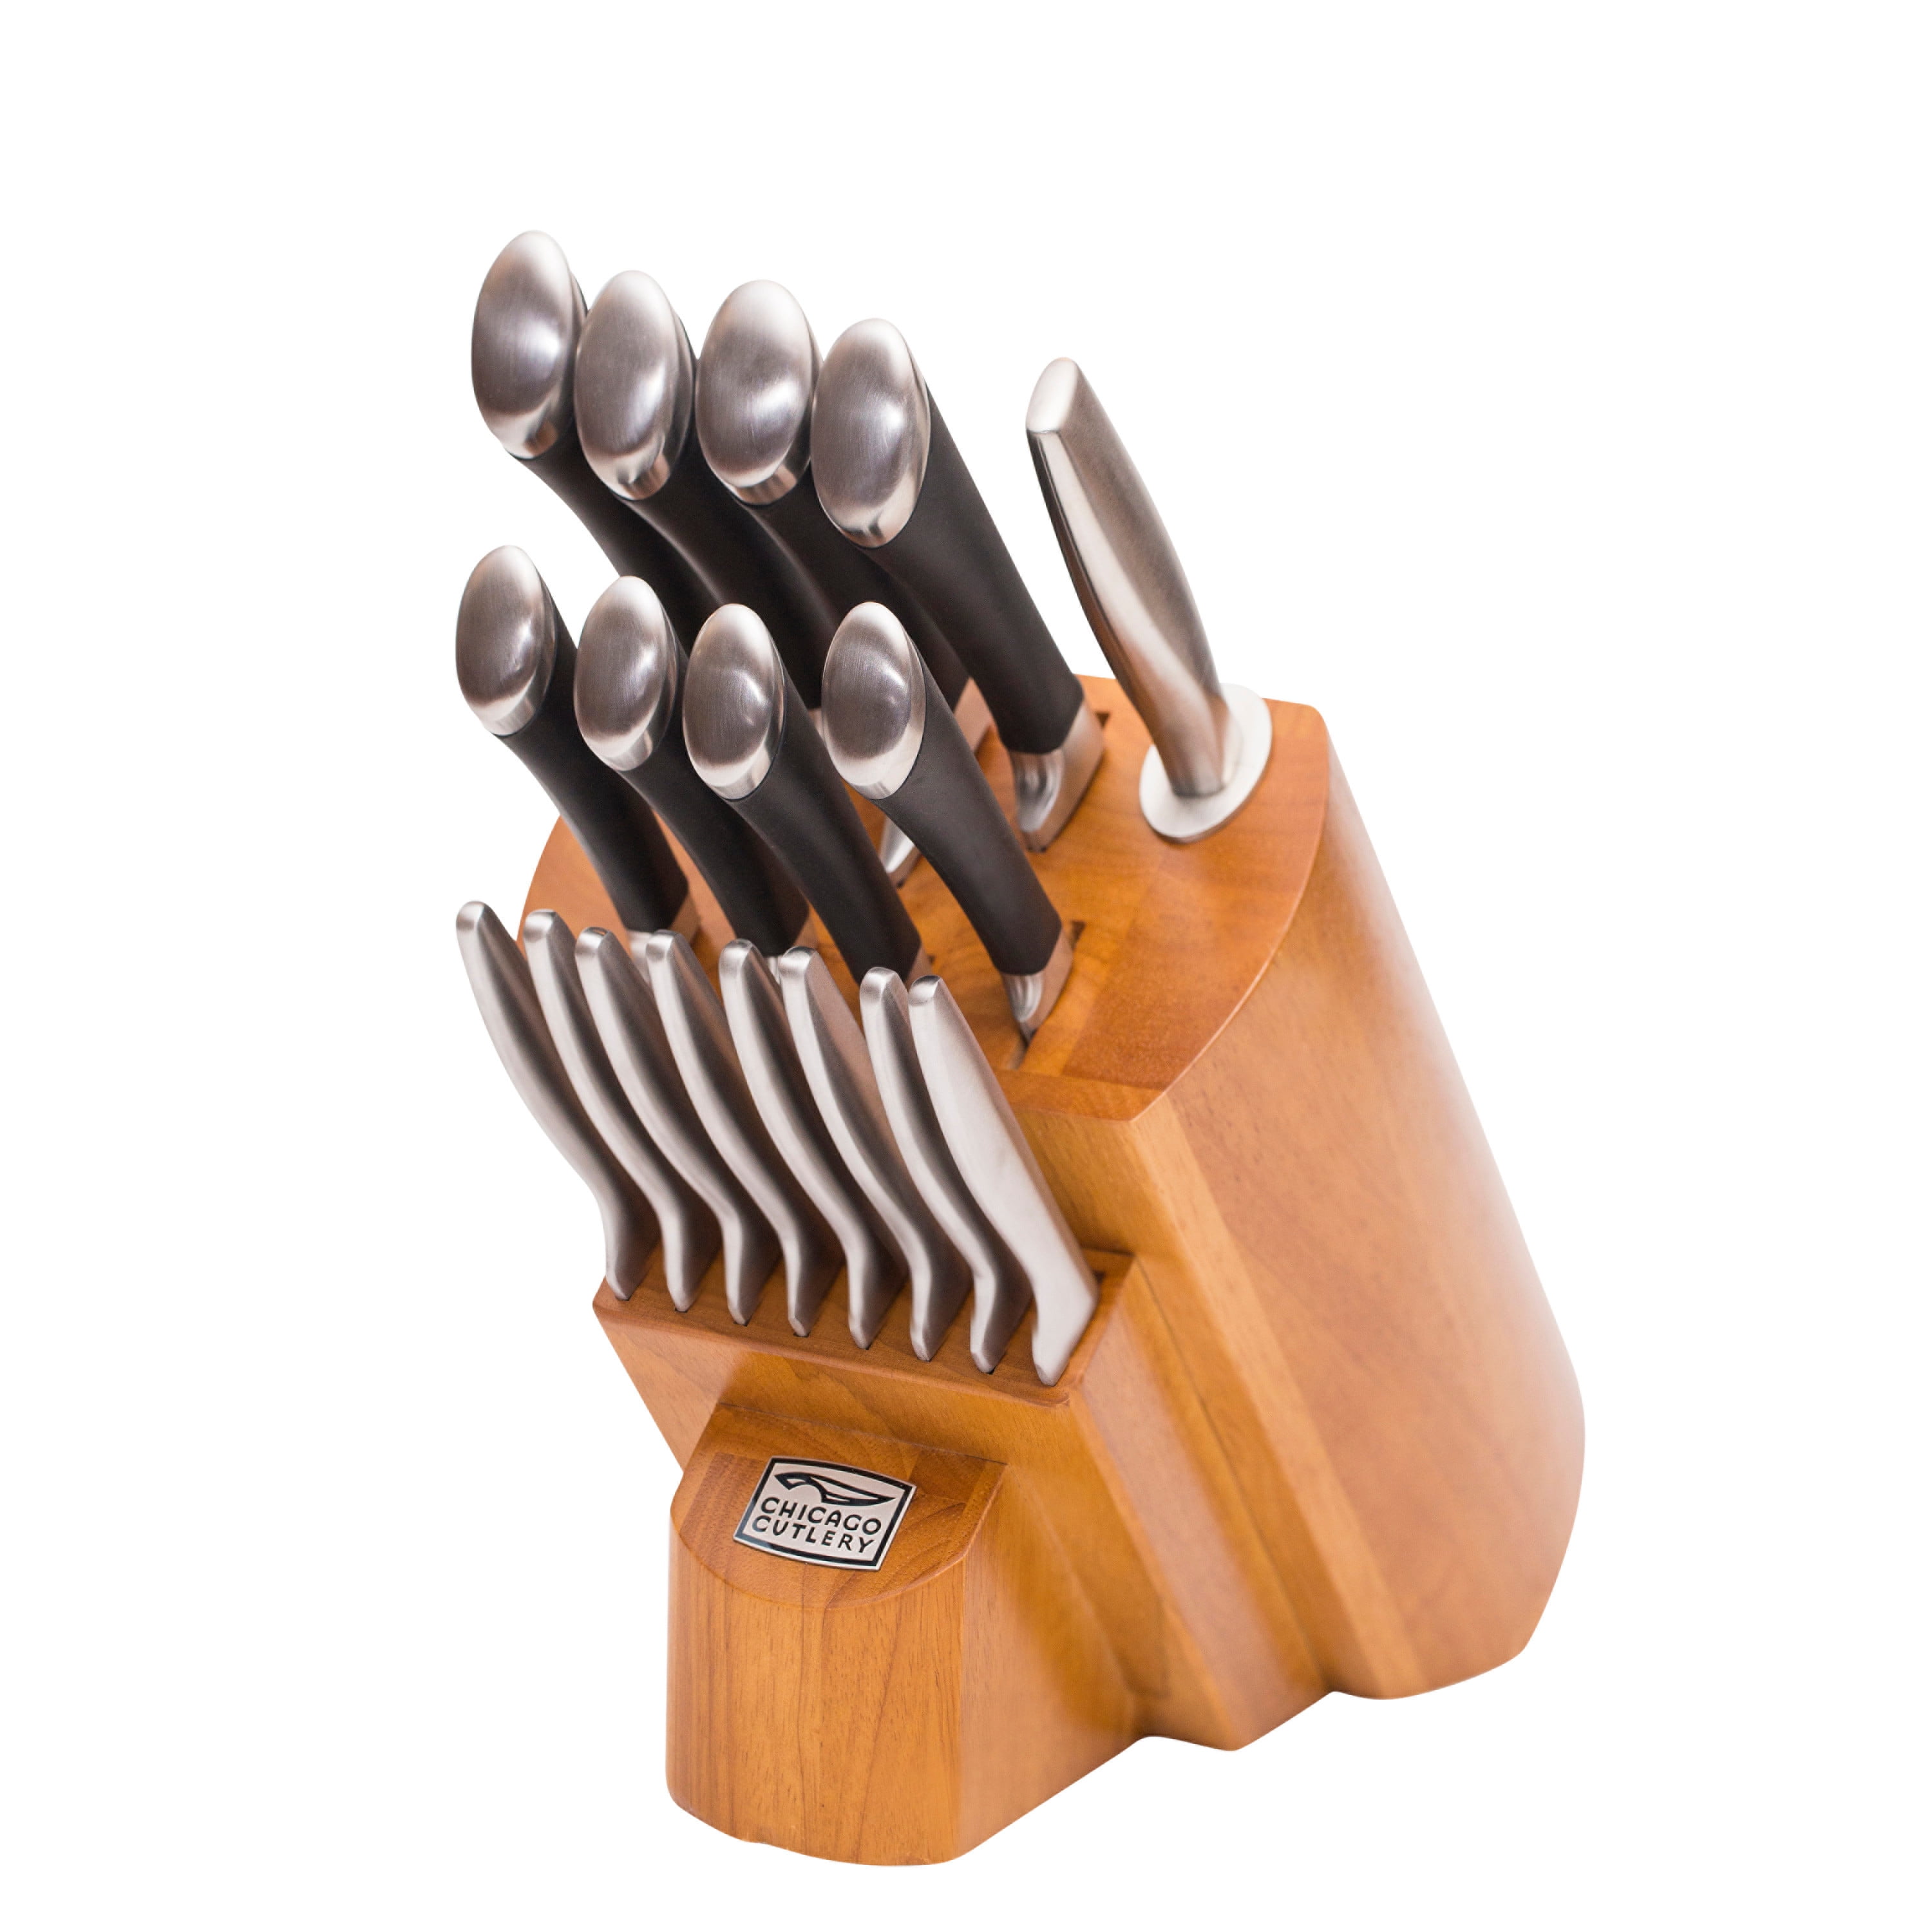 Chicago Cutlery Fusion 6 Piece Forged Premium Steak Knife Set, Cushion-Grip  Handles with Stainless Steel Blades, Resists Stains, Rust, & Pitting